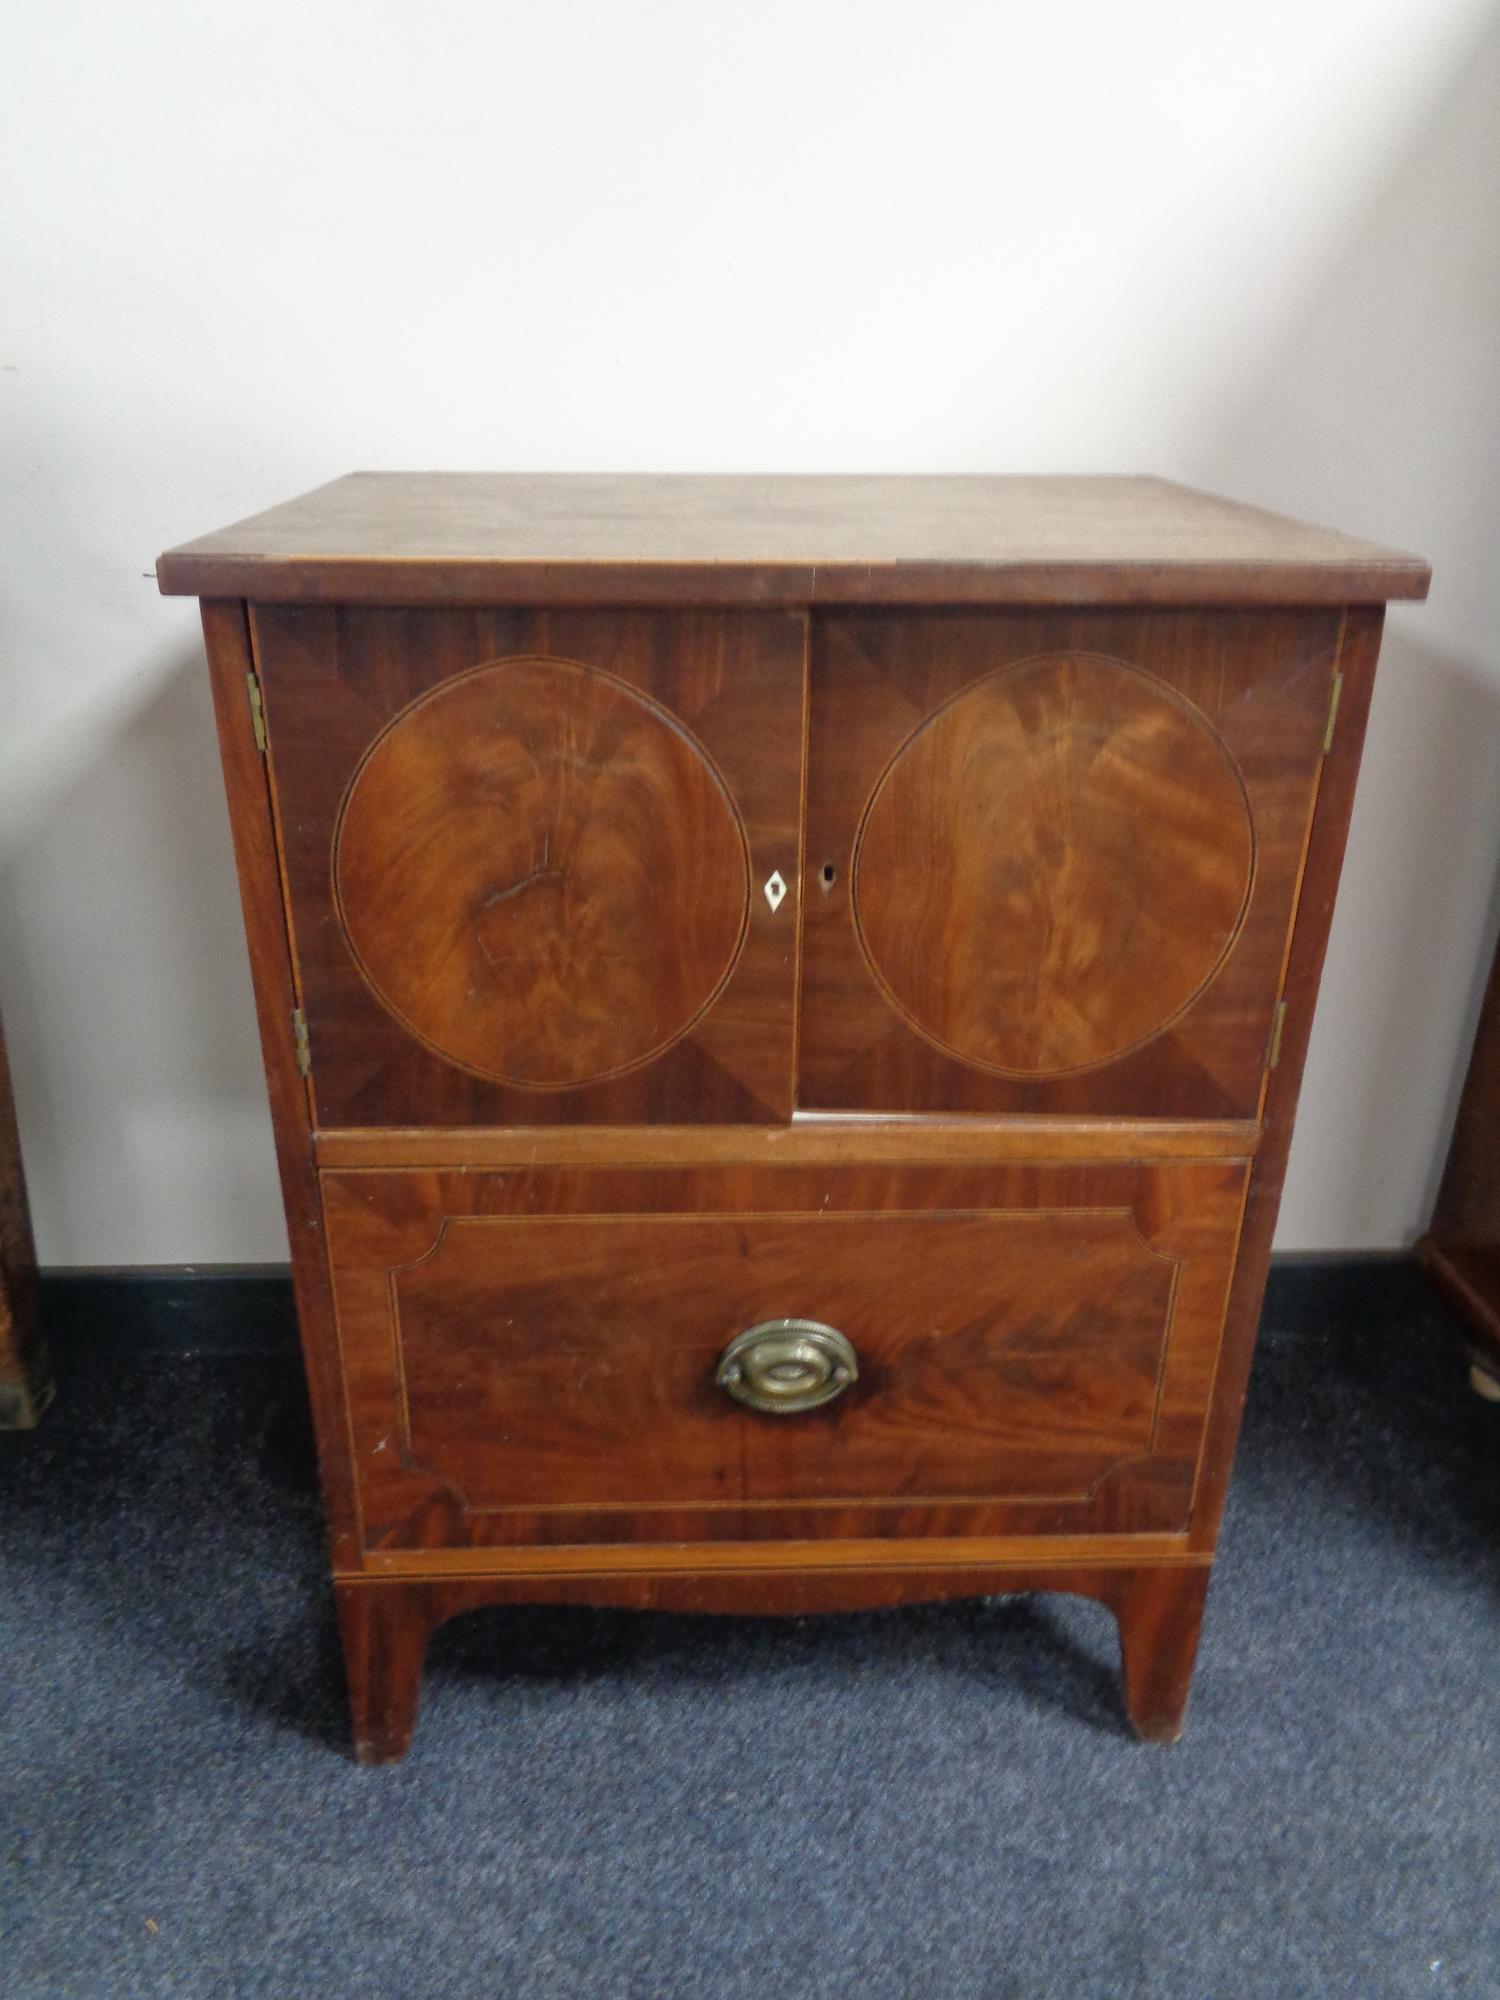 A 19th century inlaid mahogany double door cabinet fitted a drawer beneath